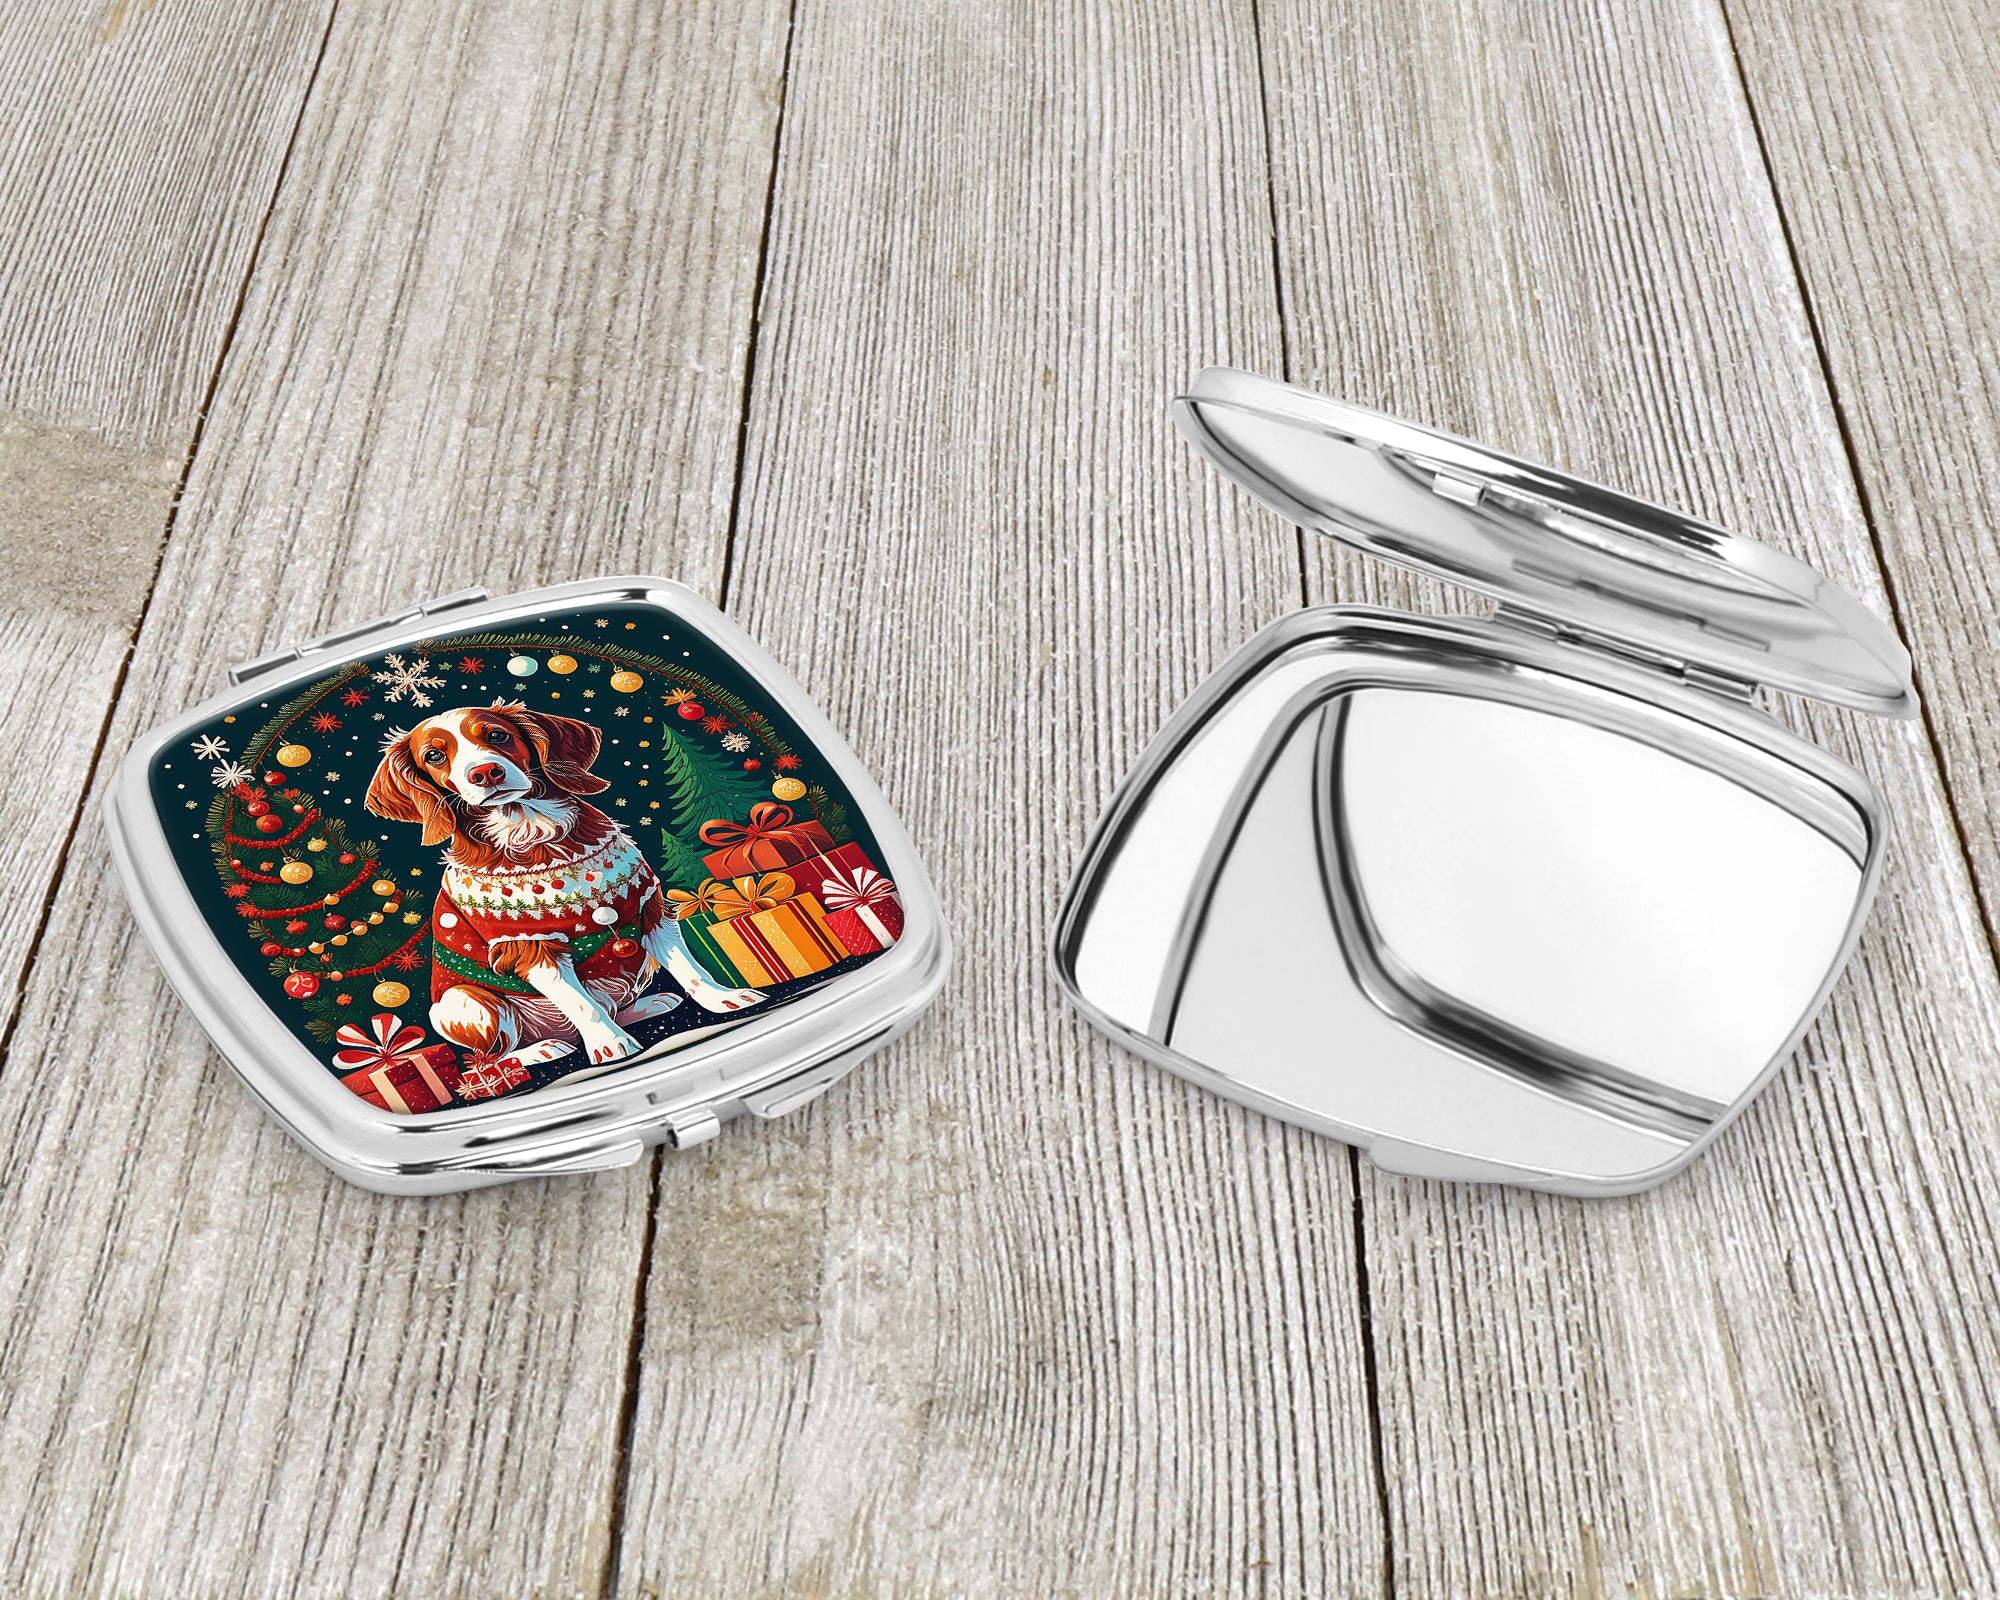 Brittany Spaniel Christmas Compact Mirror